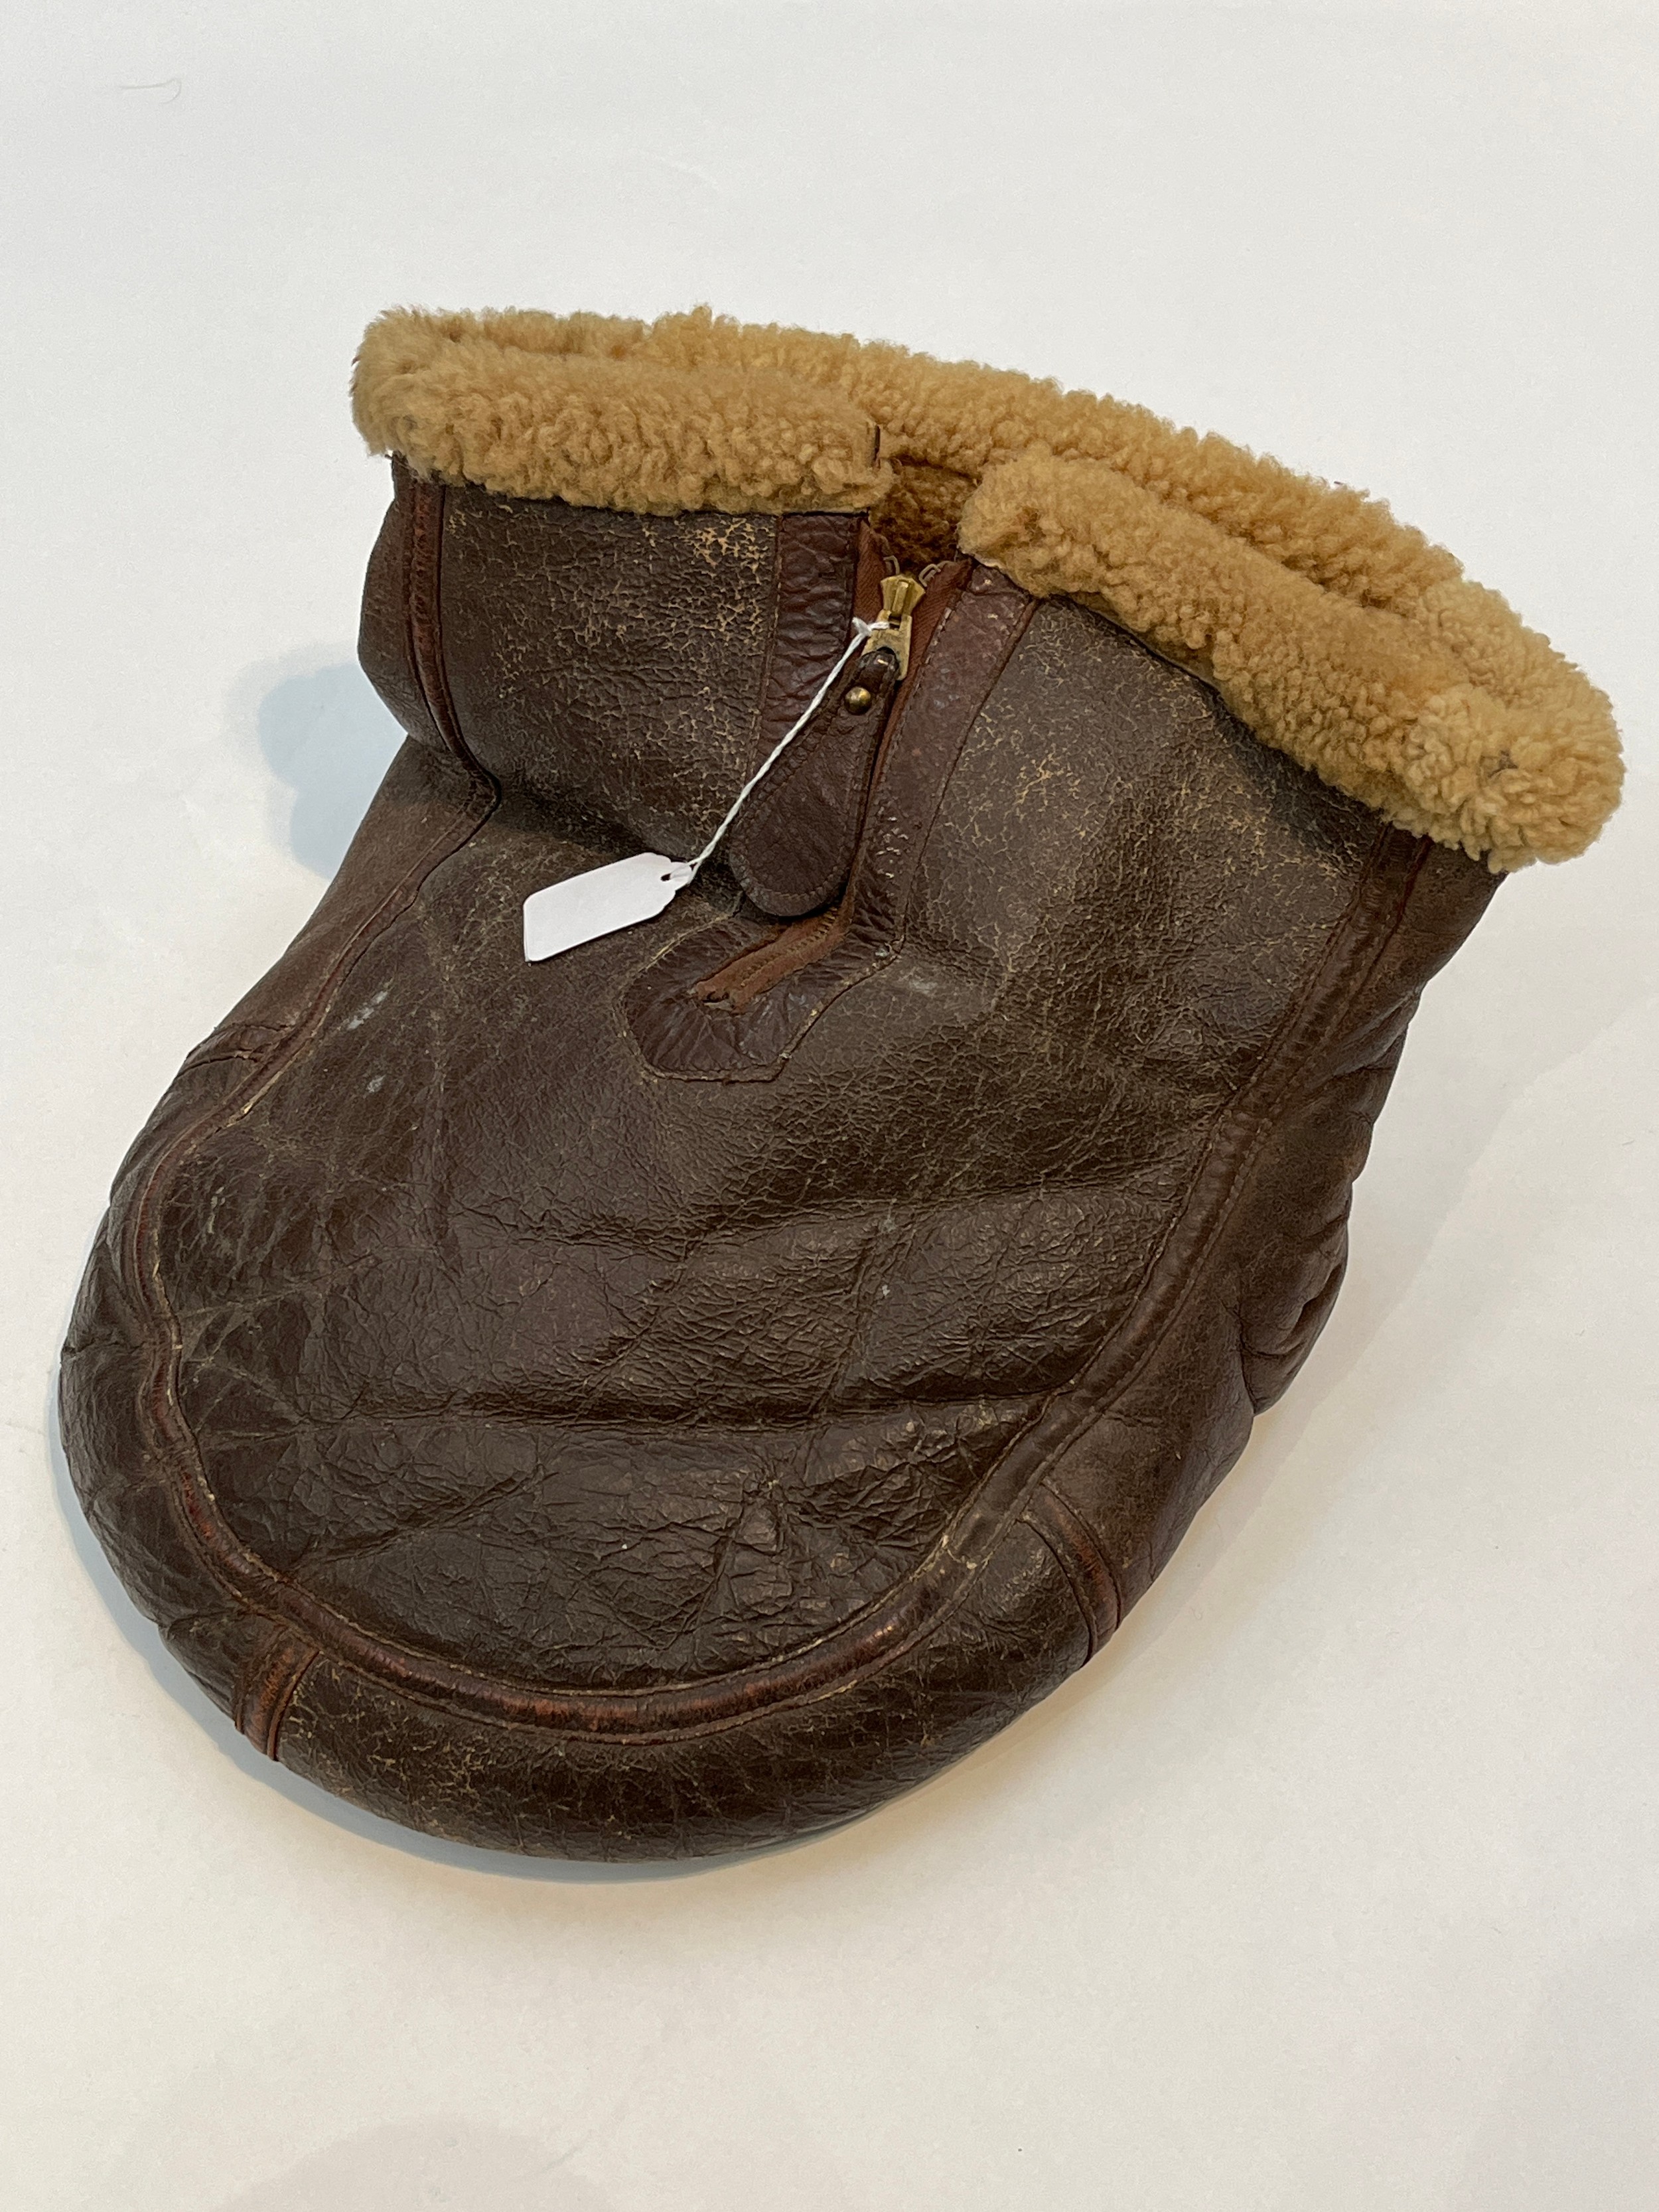 A scarce WWII RAF foot warmer, sheepskin and leather, possibly Irvin